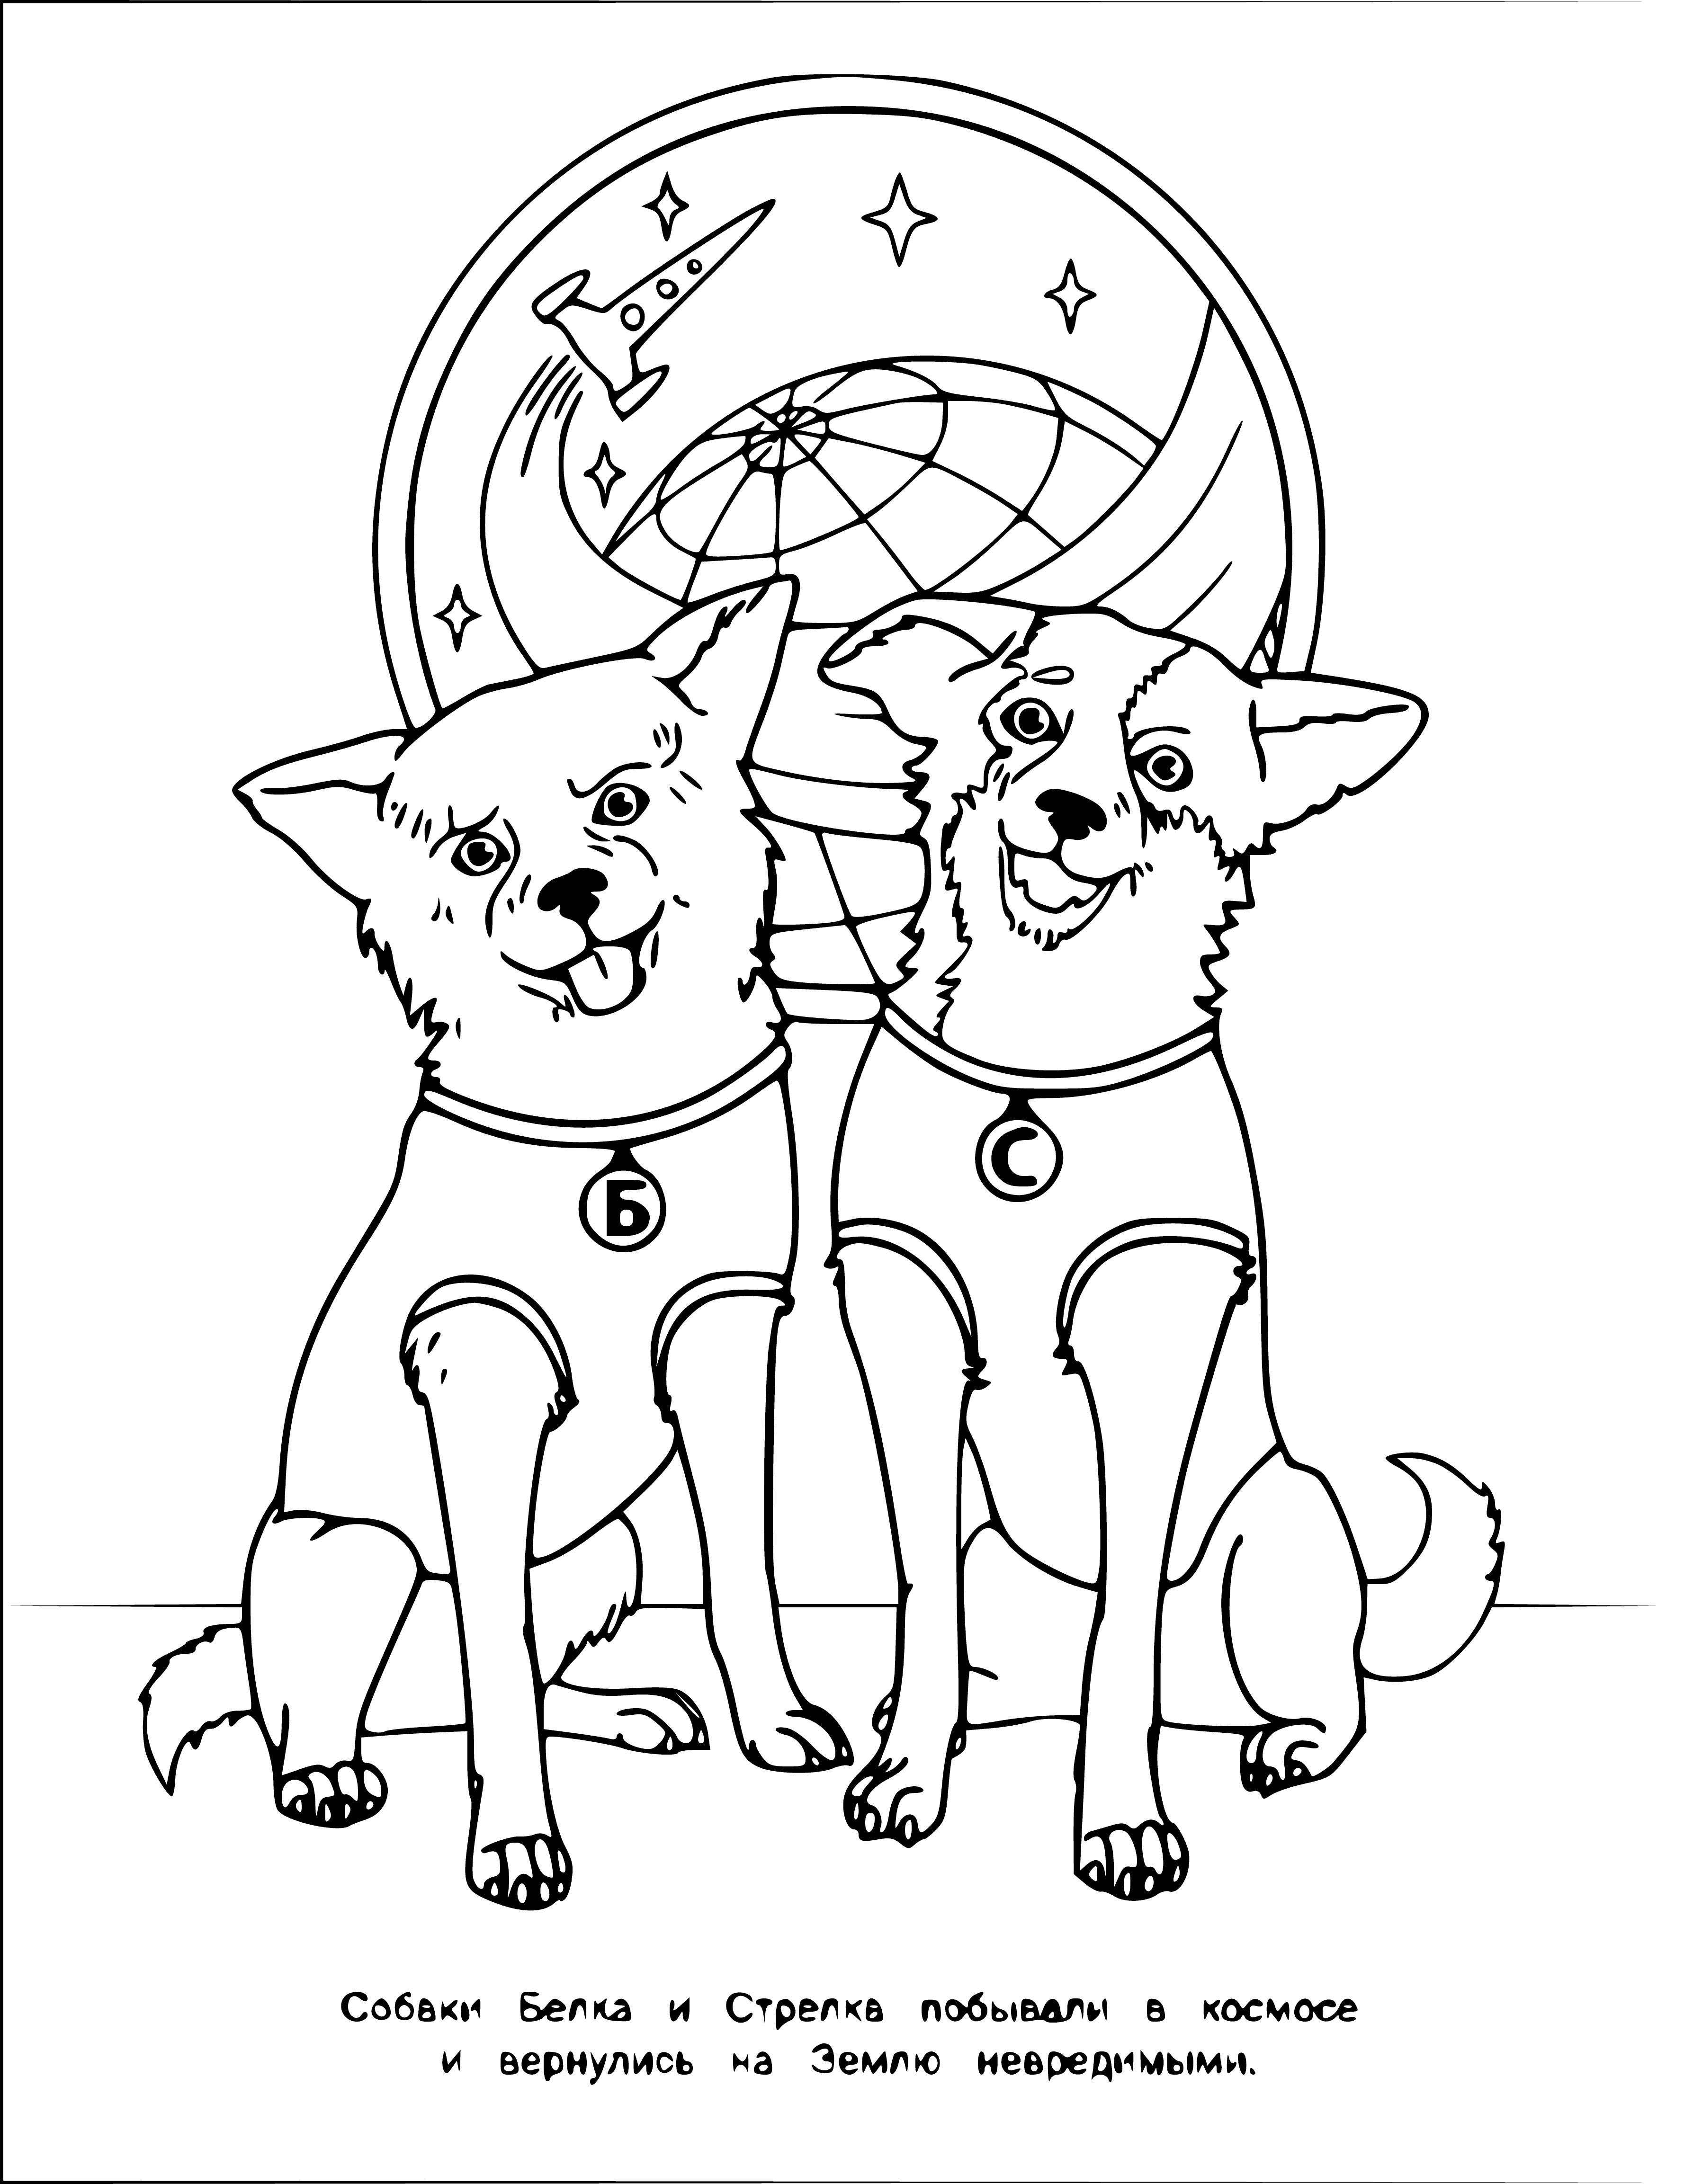 coloring page: A dark, empty space is lit up by a bright, halo-surrounded object in its center.